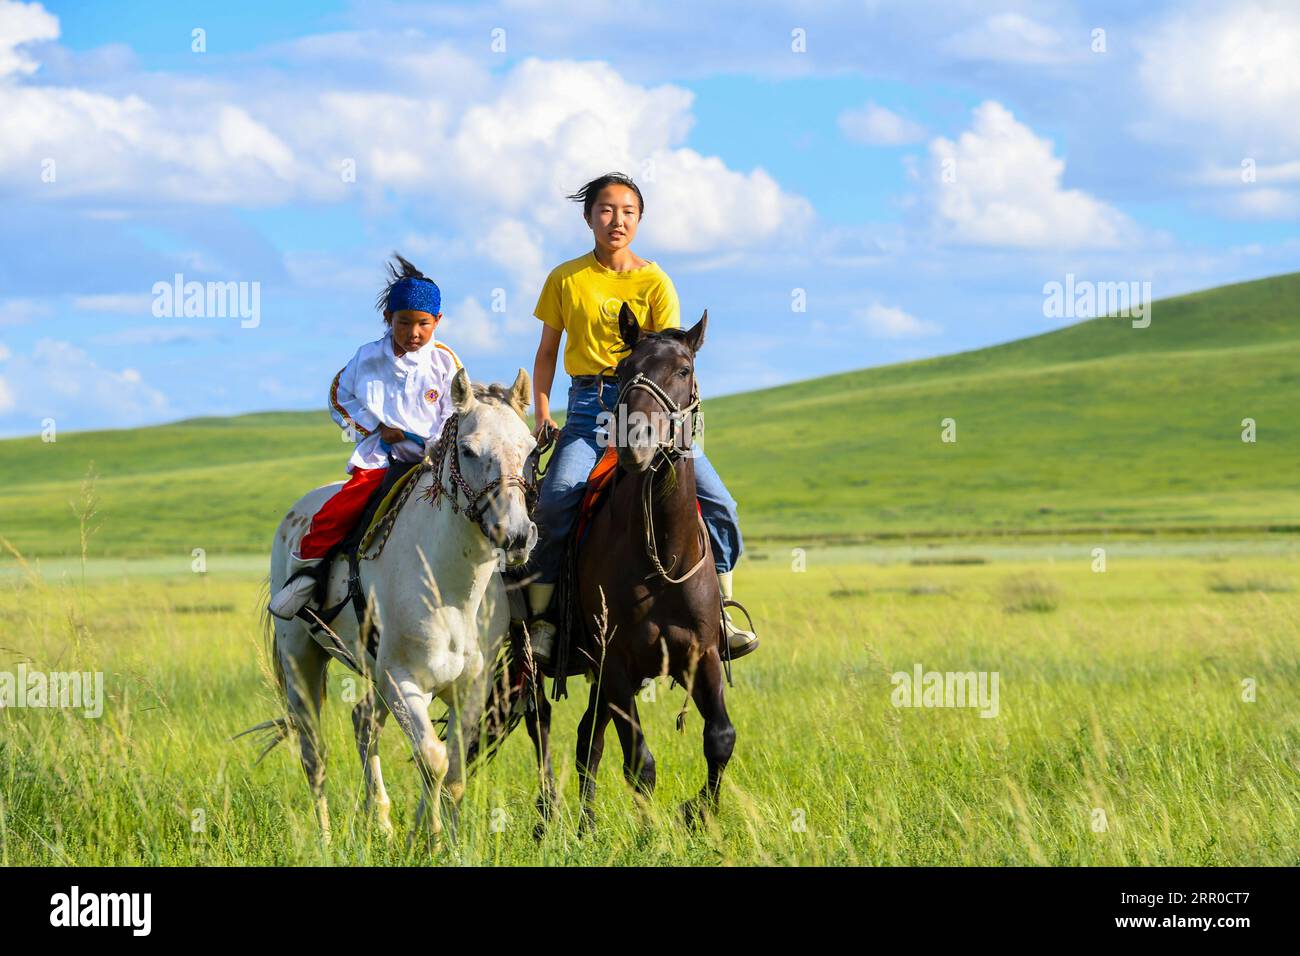 200809 -- XILIN GOL, Aug. 9, 2020 -- Xilinhua R and a friend ride horses on the Baiyinxile grassland in Xilinhot, north China s Inner Mongolia Autonomous Region, Aug. 4, 2020. Summer vationtion has been Xilinhua s favorite time of year. In order to attend middle school, the 14-year-old lives most of the time with her grandparents in downtown Xilinhot, separated from her parents who run a ranch on the Baiyinxile pasture. Therefore, summer means both relaxation and reunion to the seventh grader. Xilinhua s father Gangsuhe is a famous horse rider. Learning from him, Xilinhua had also mastered equ Stock Photo